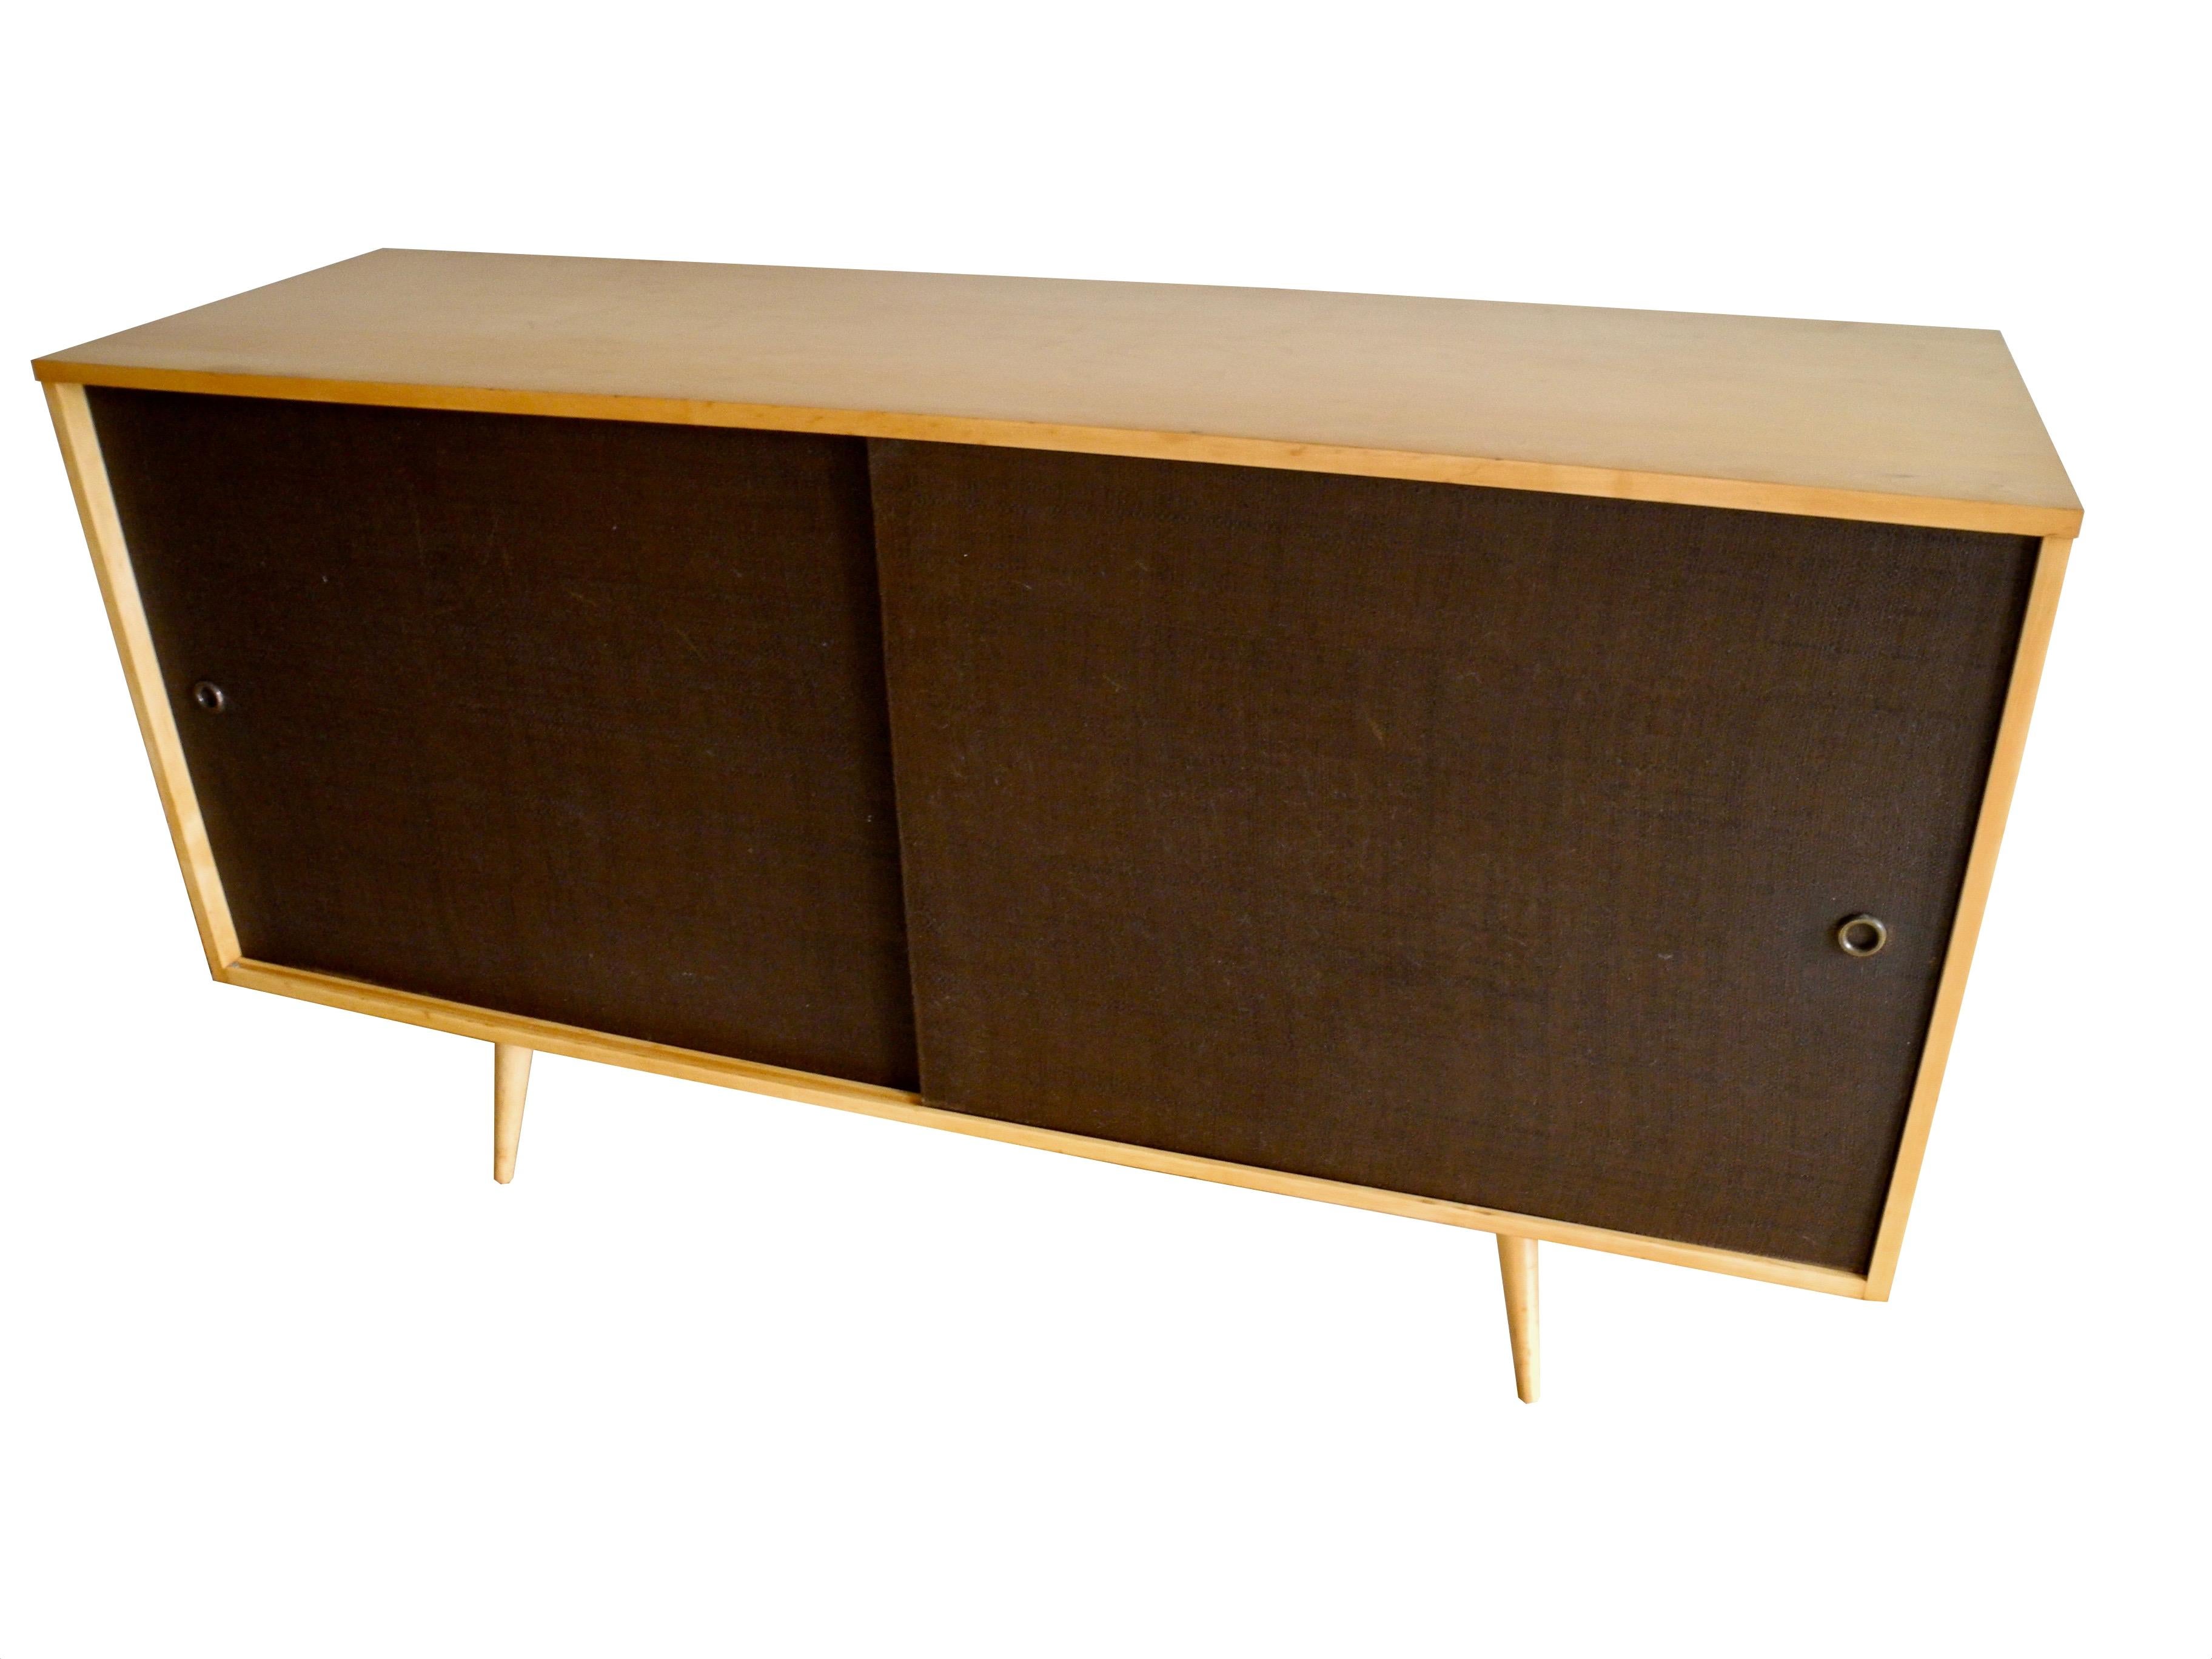 American Mid-Century Modern Storage Sideboard in Maple with Brown Doors by Paul McCobb For Sale